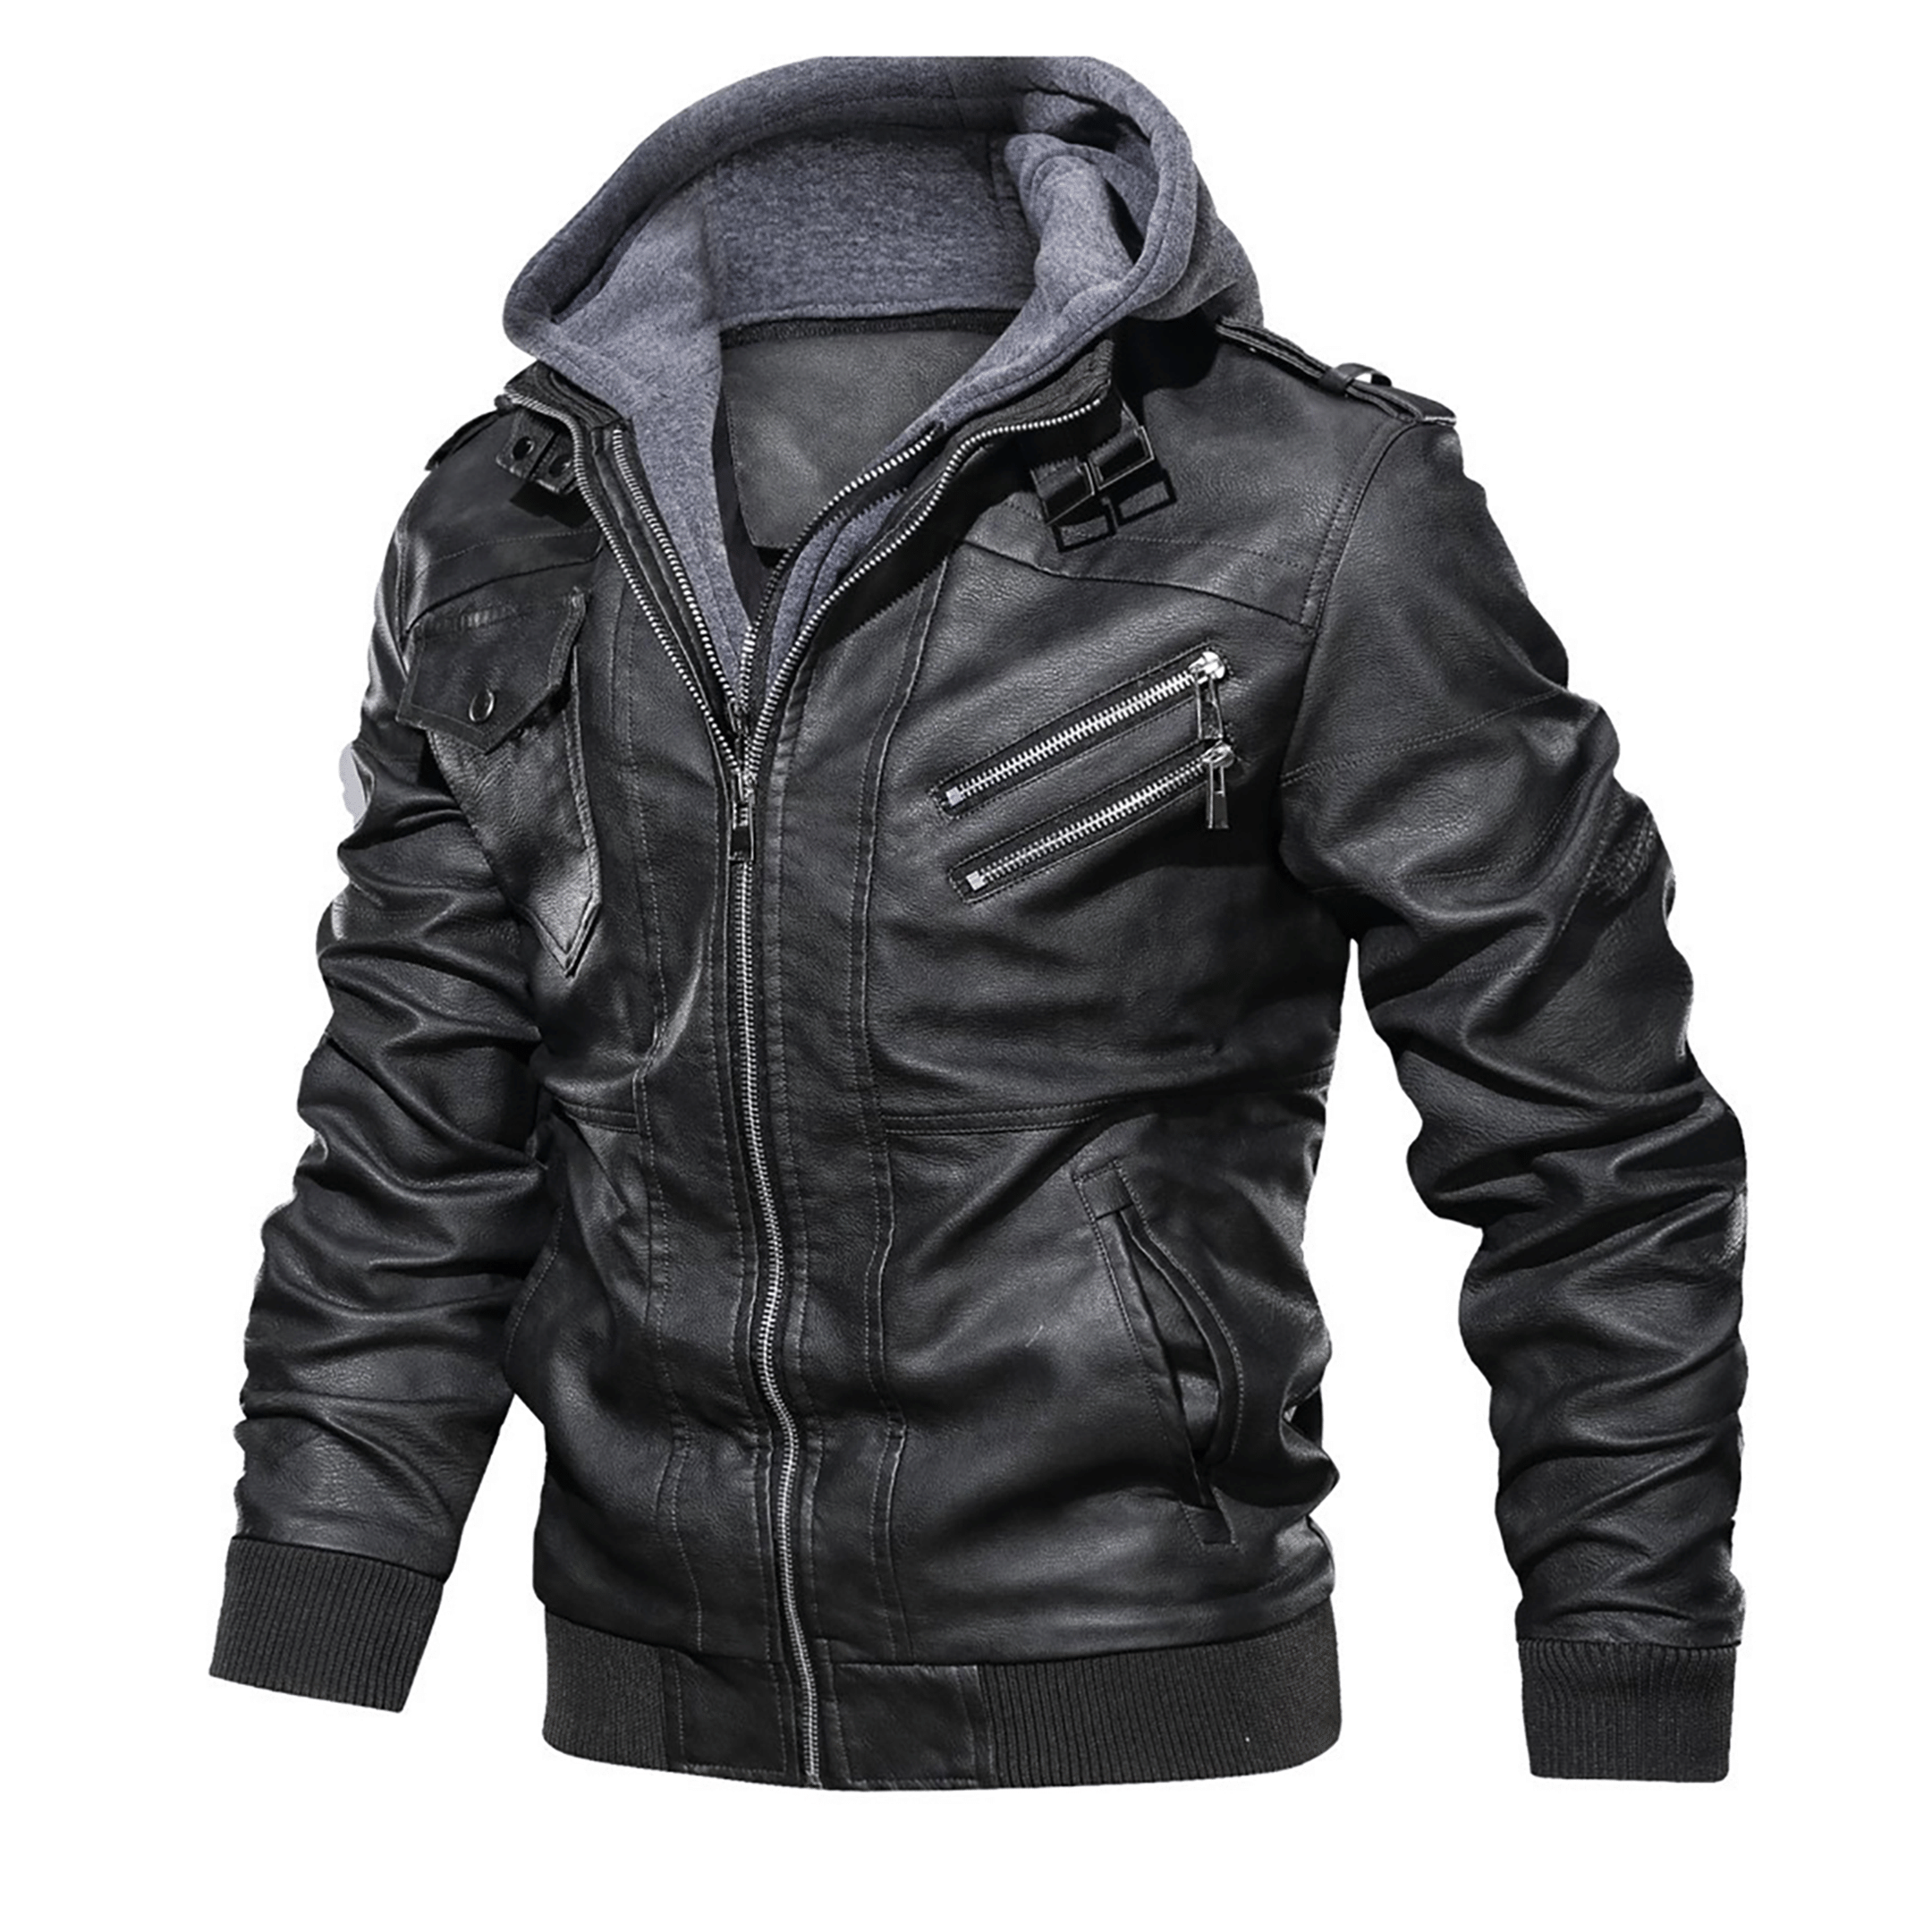 Top leather jackets and latest products 337